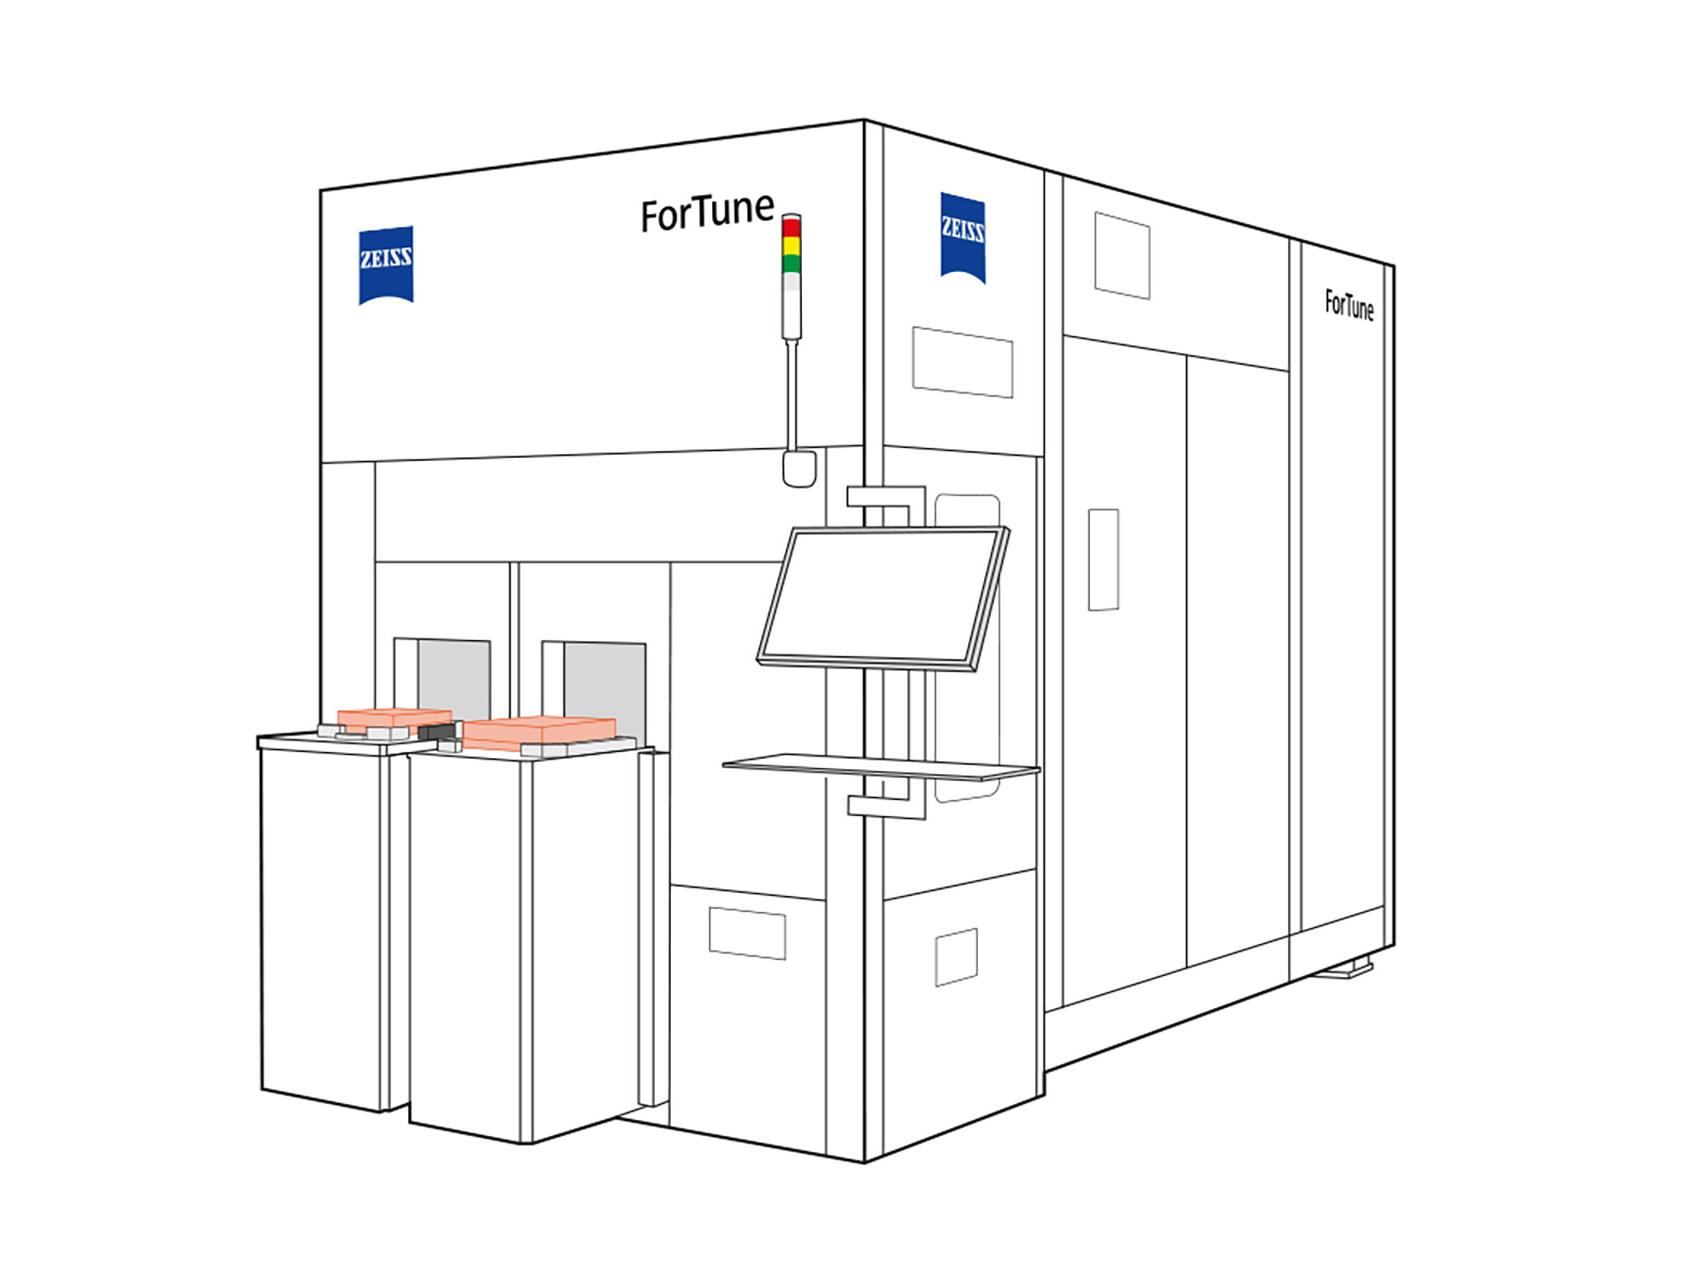 ZEISS ForTune system for Photomasks